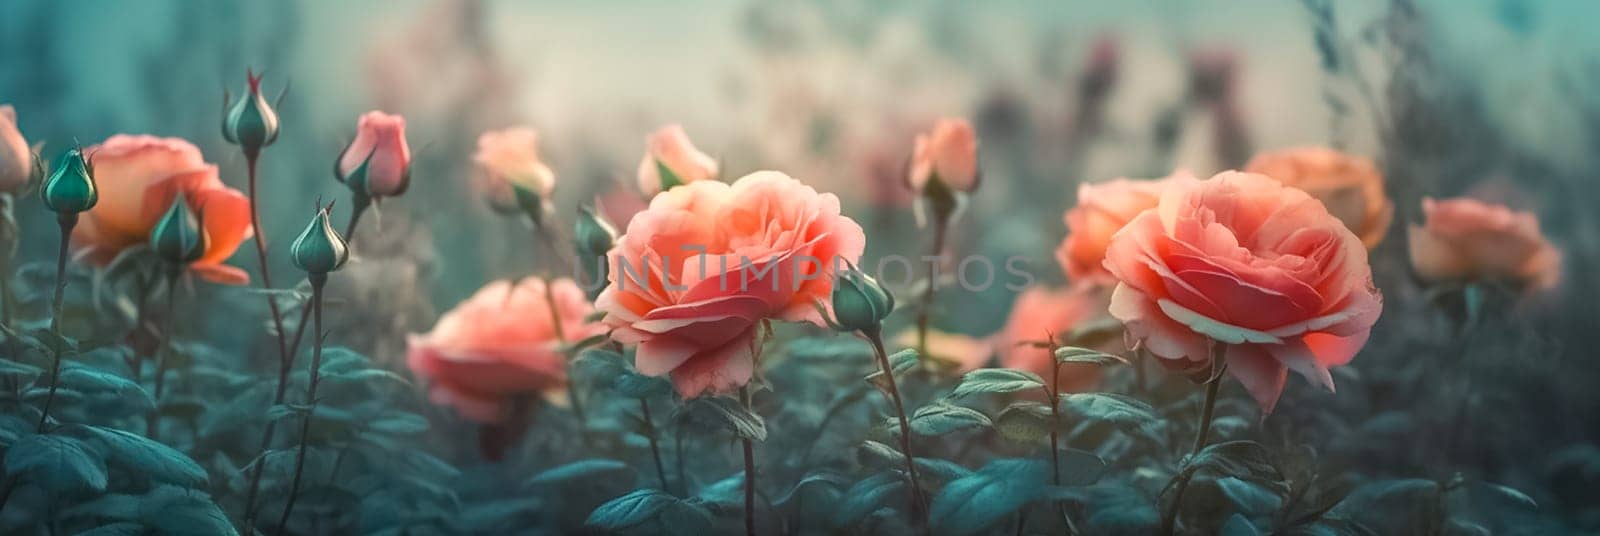 A field of delicate red coral roses. Long banner with rose flowers. Roses grow in the garden or in the field